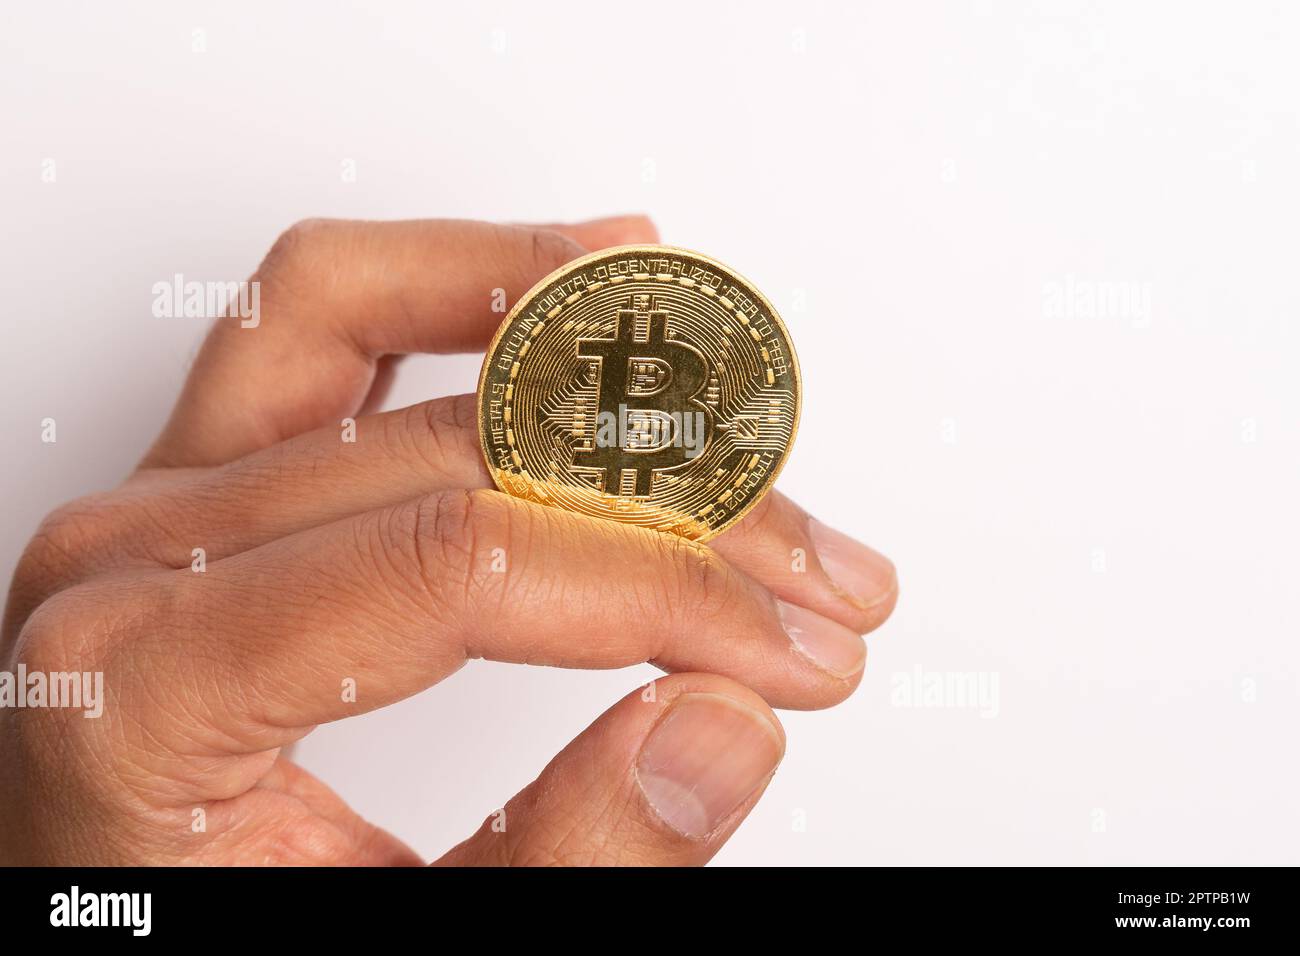 Invest in the future with Bitcoin. Holding a Bitcoin in hand symbolizes the digital currency's growing popularity and potential for massive gains. Don Stock Photo